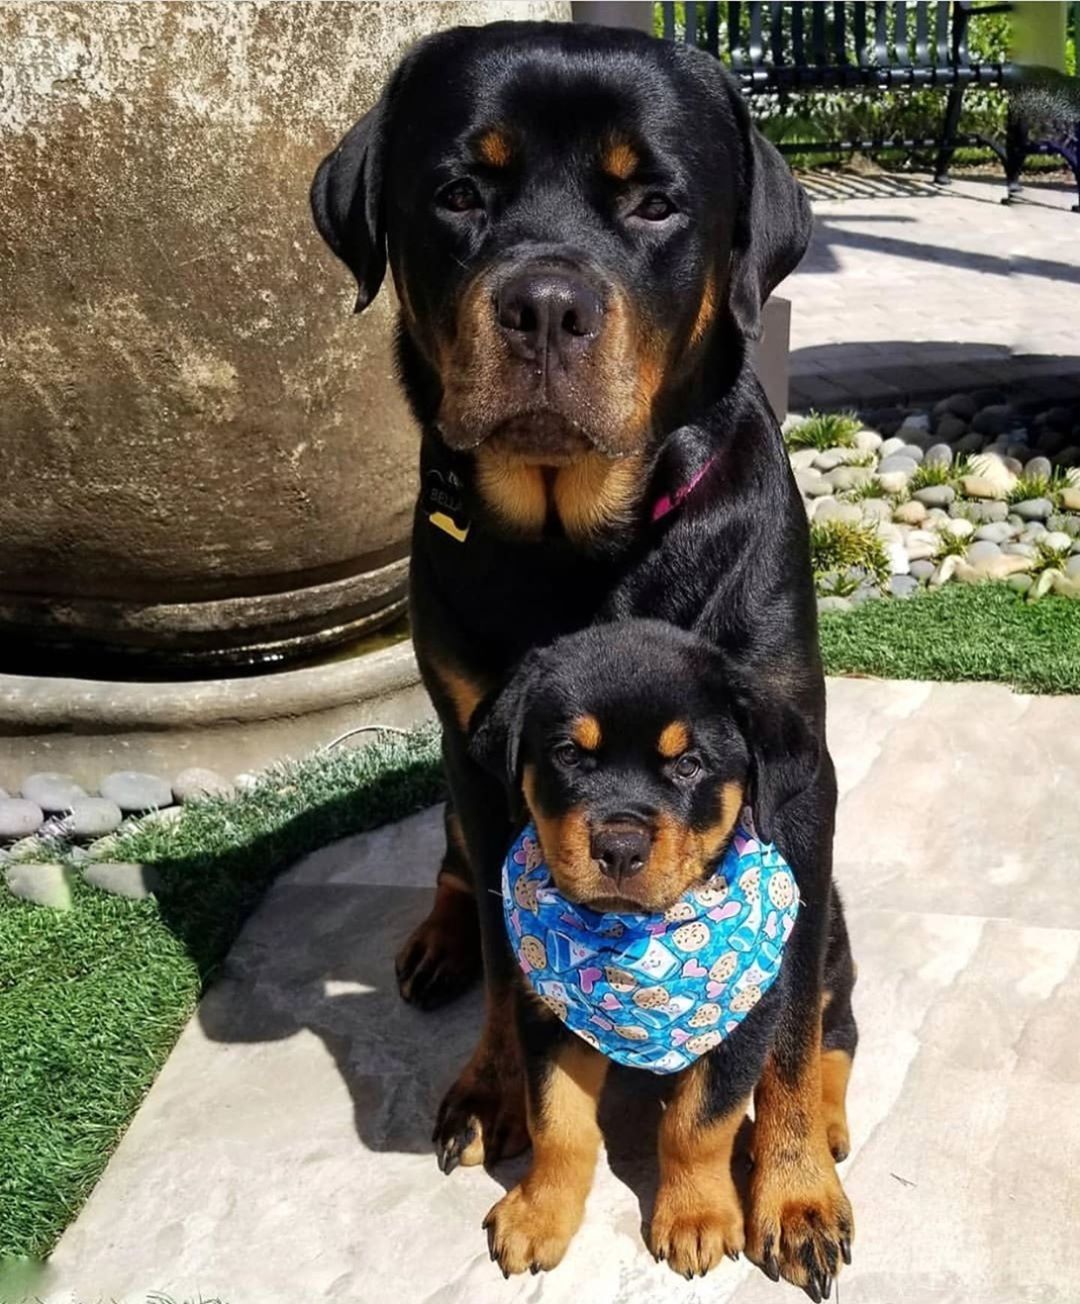 A Rottweiler puppy with an adult Rottweiler behind him while sitting at the park